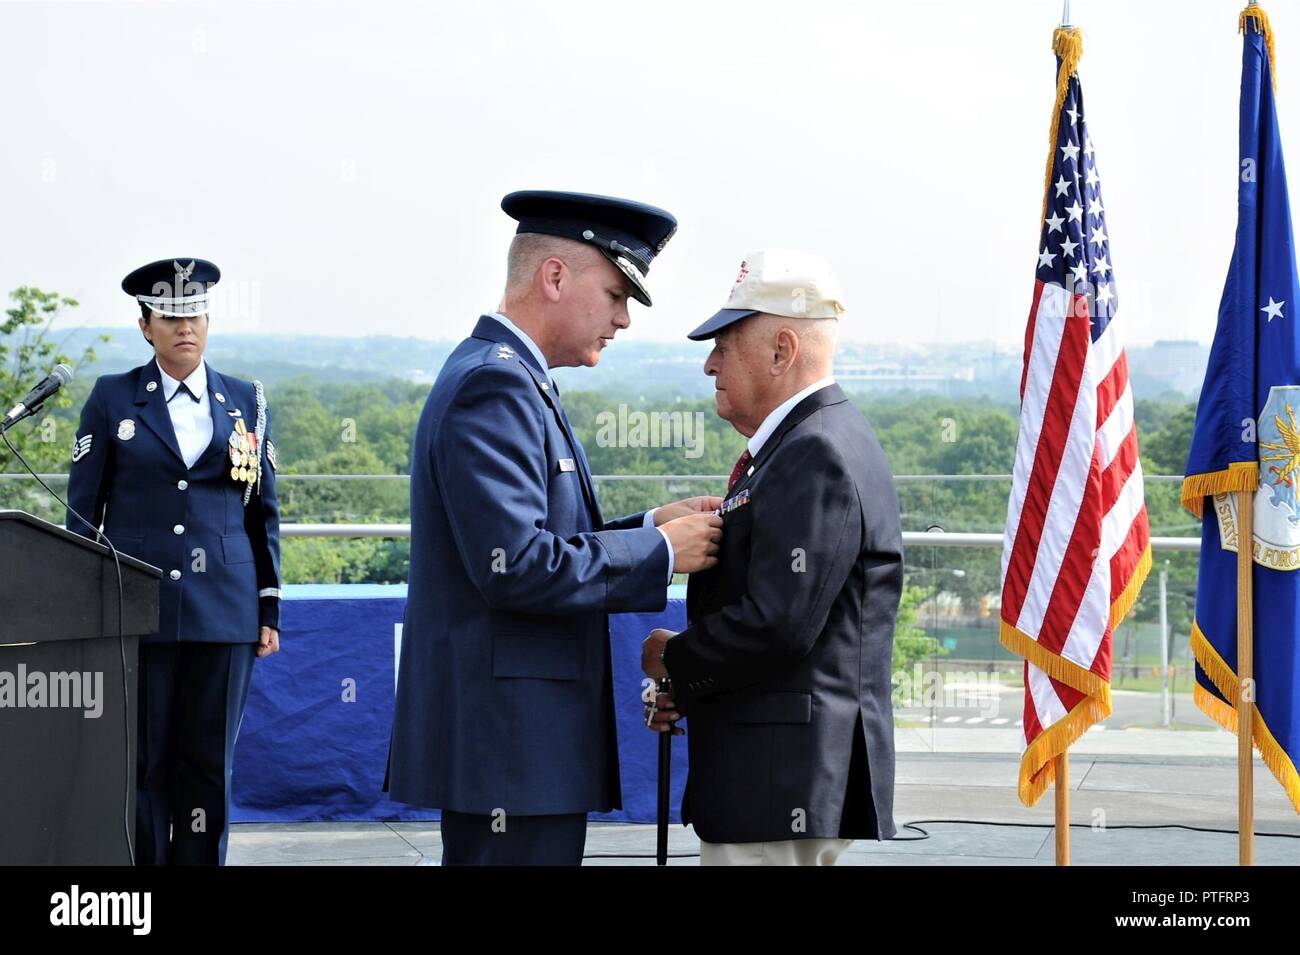 Maj. Gen. James A. Jacobson (second from right), Air Force District of Washington commander, pins a Purple Heart ribbon on World War II veteran, Lt. John Pedevillano, during an award presentation ceremony July 14, 2017 at the U.S. Air Force Memorial, Arlington, Va. Pedevillano, a B-17 bombardier pilot, and his crew assigned to the 306th Bomb Group of the “Mighty Eighth” Air Force were shot down during a bombing mission in airspace over Nazi Germany on April 24, 1944. (Air Force Stock Photo